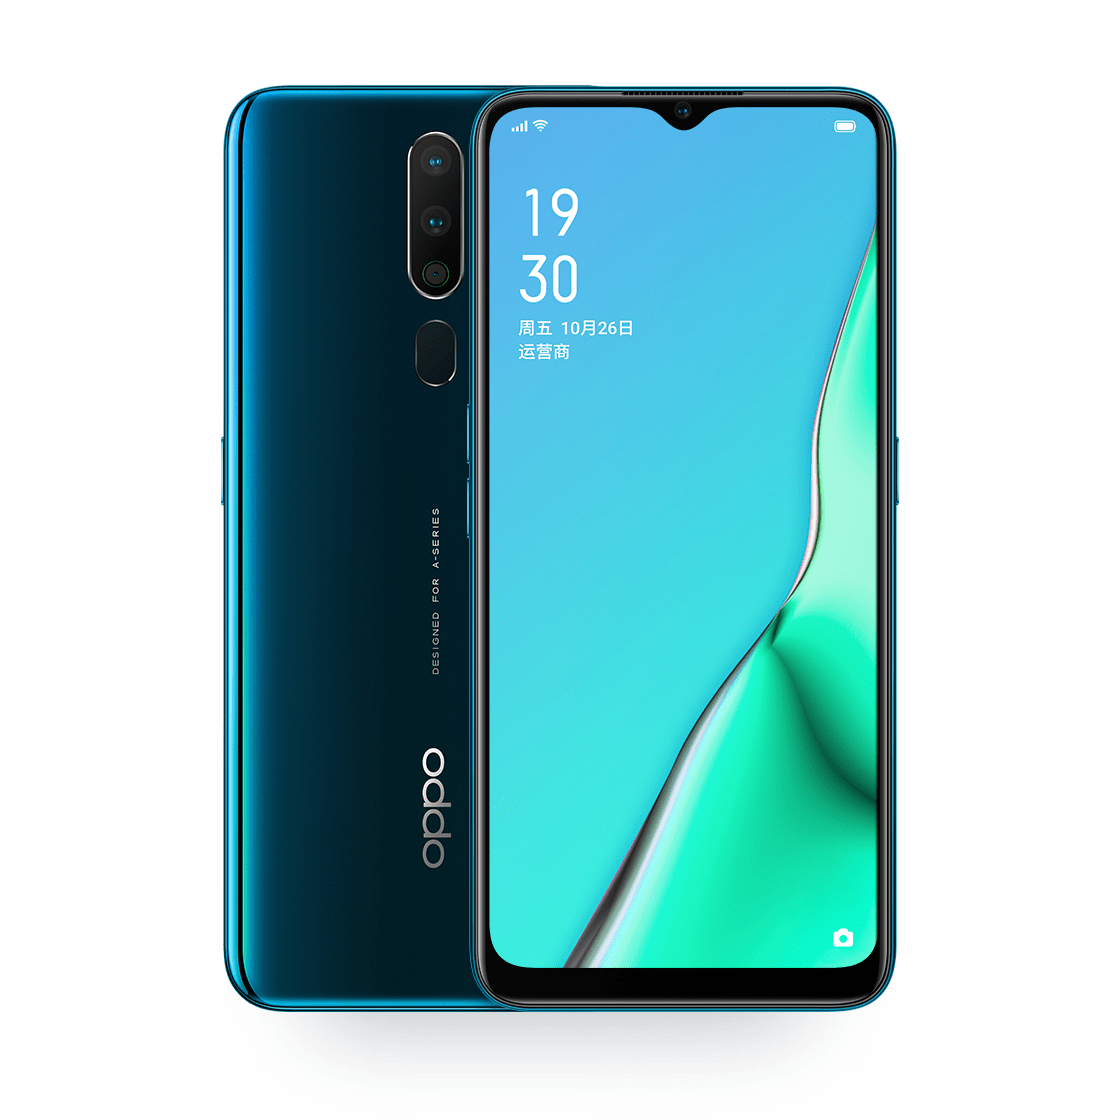 OPPO R11s and OPPO R11s Plus Official: Brings Full Screen Displays ...